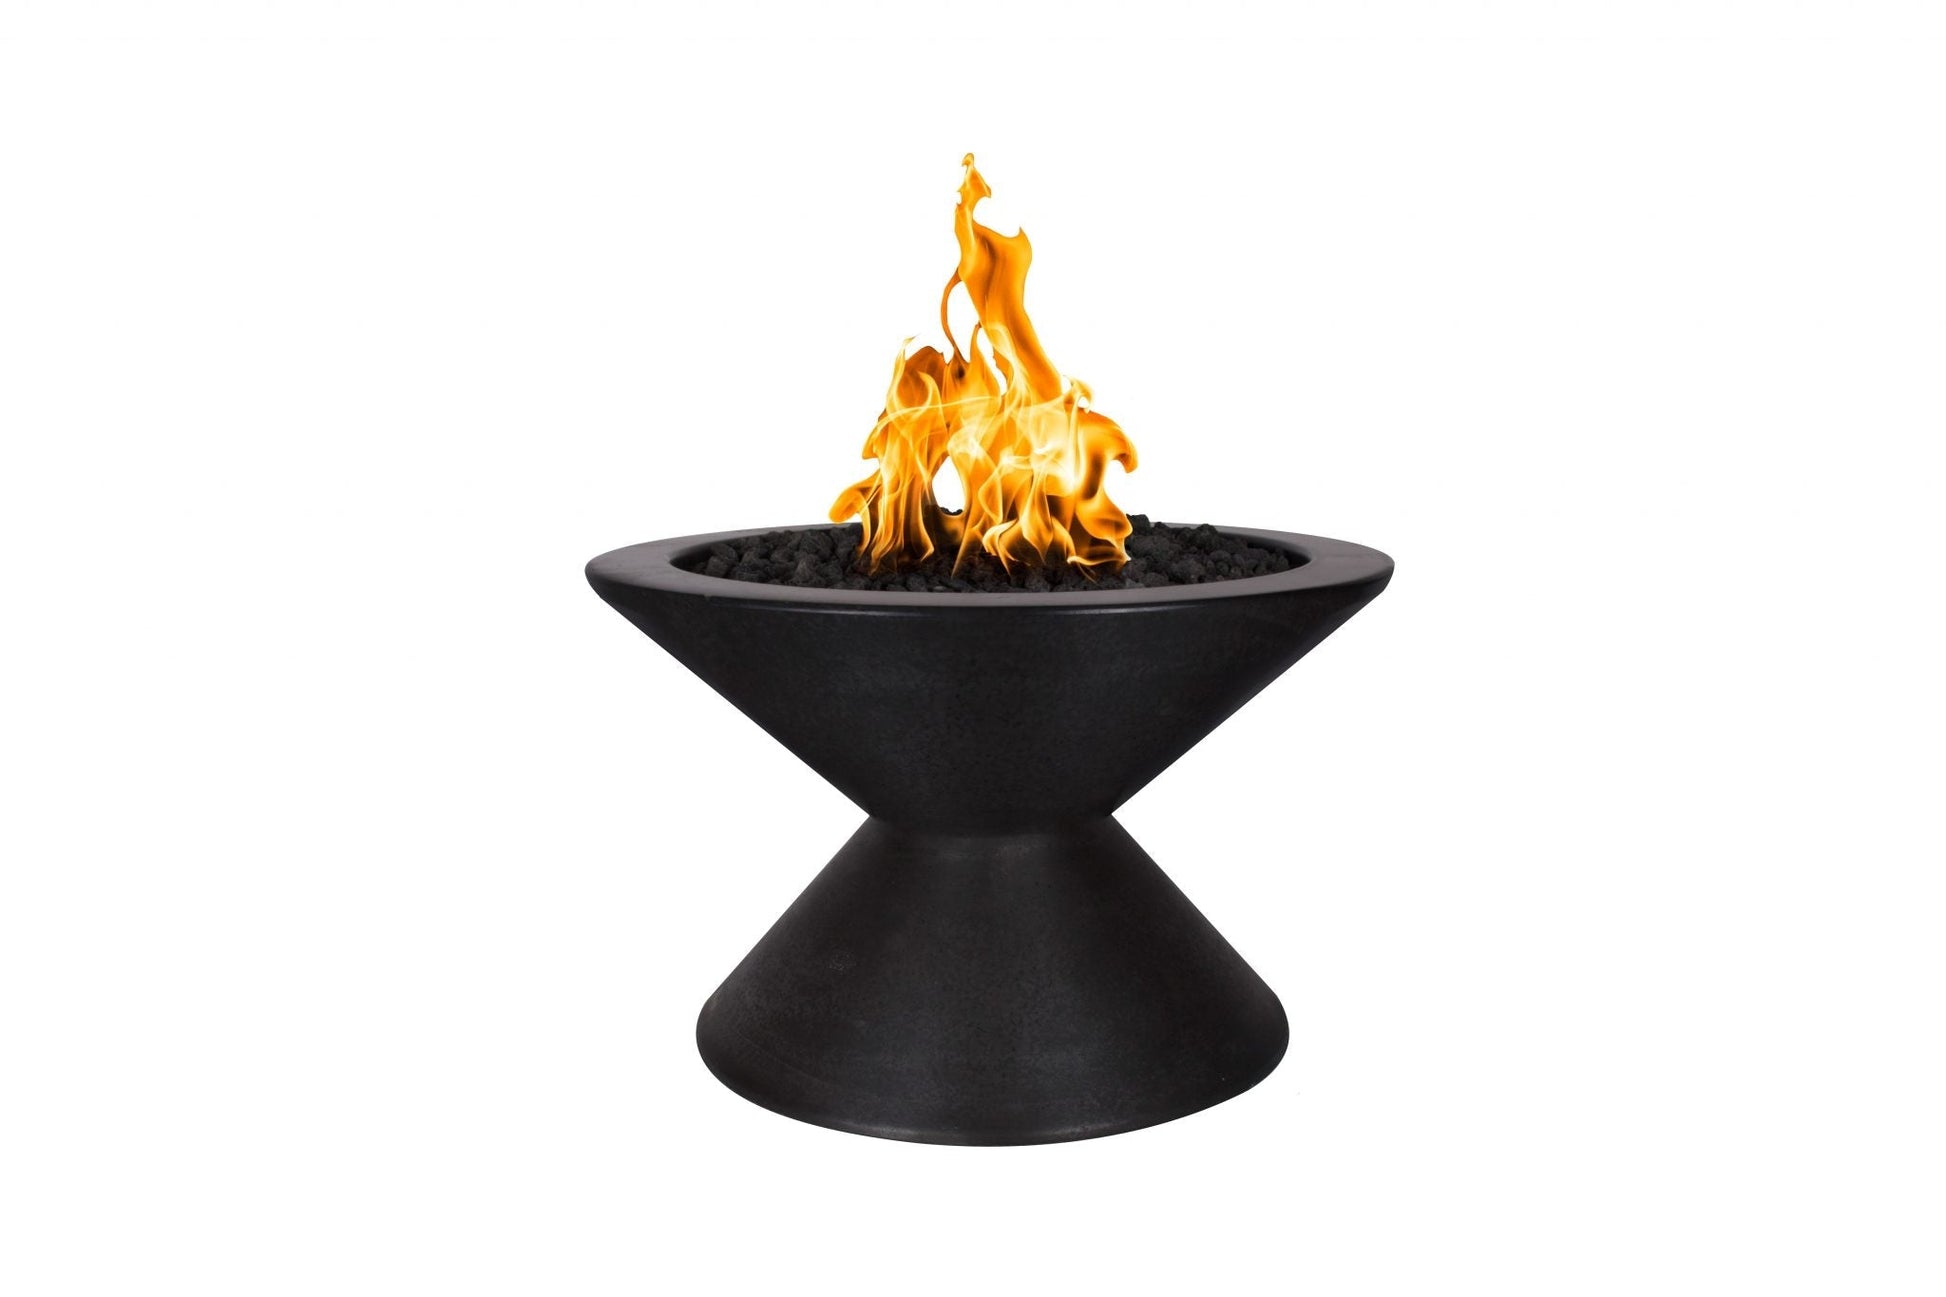 The Outdoor Plus Round Lucia 31" Metallic Silver GFRC Concrete Liquid Propane Fire Pit with Match Lit Ignition